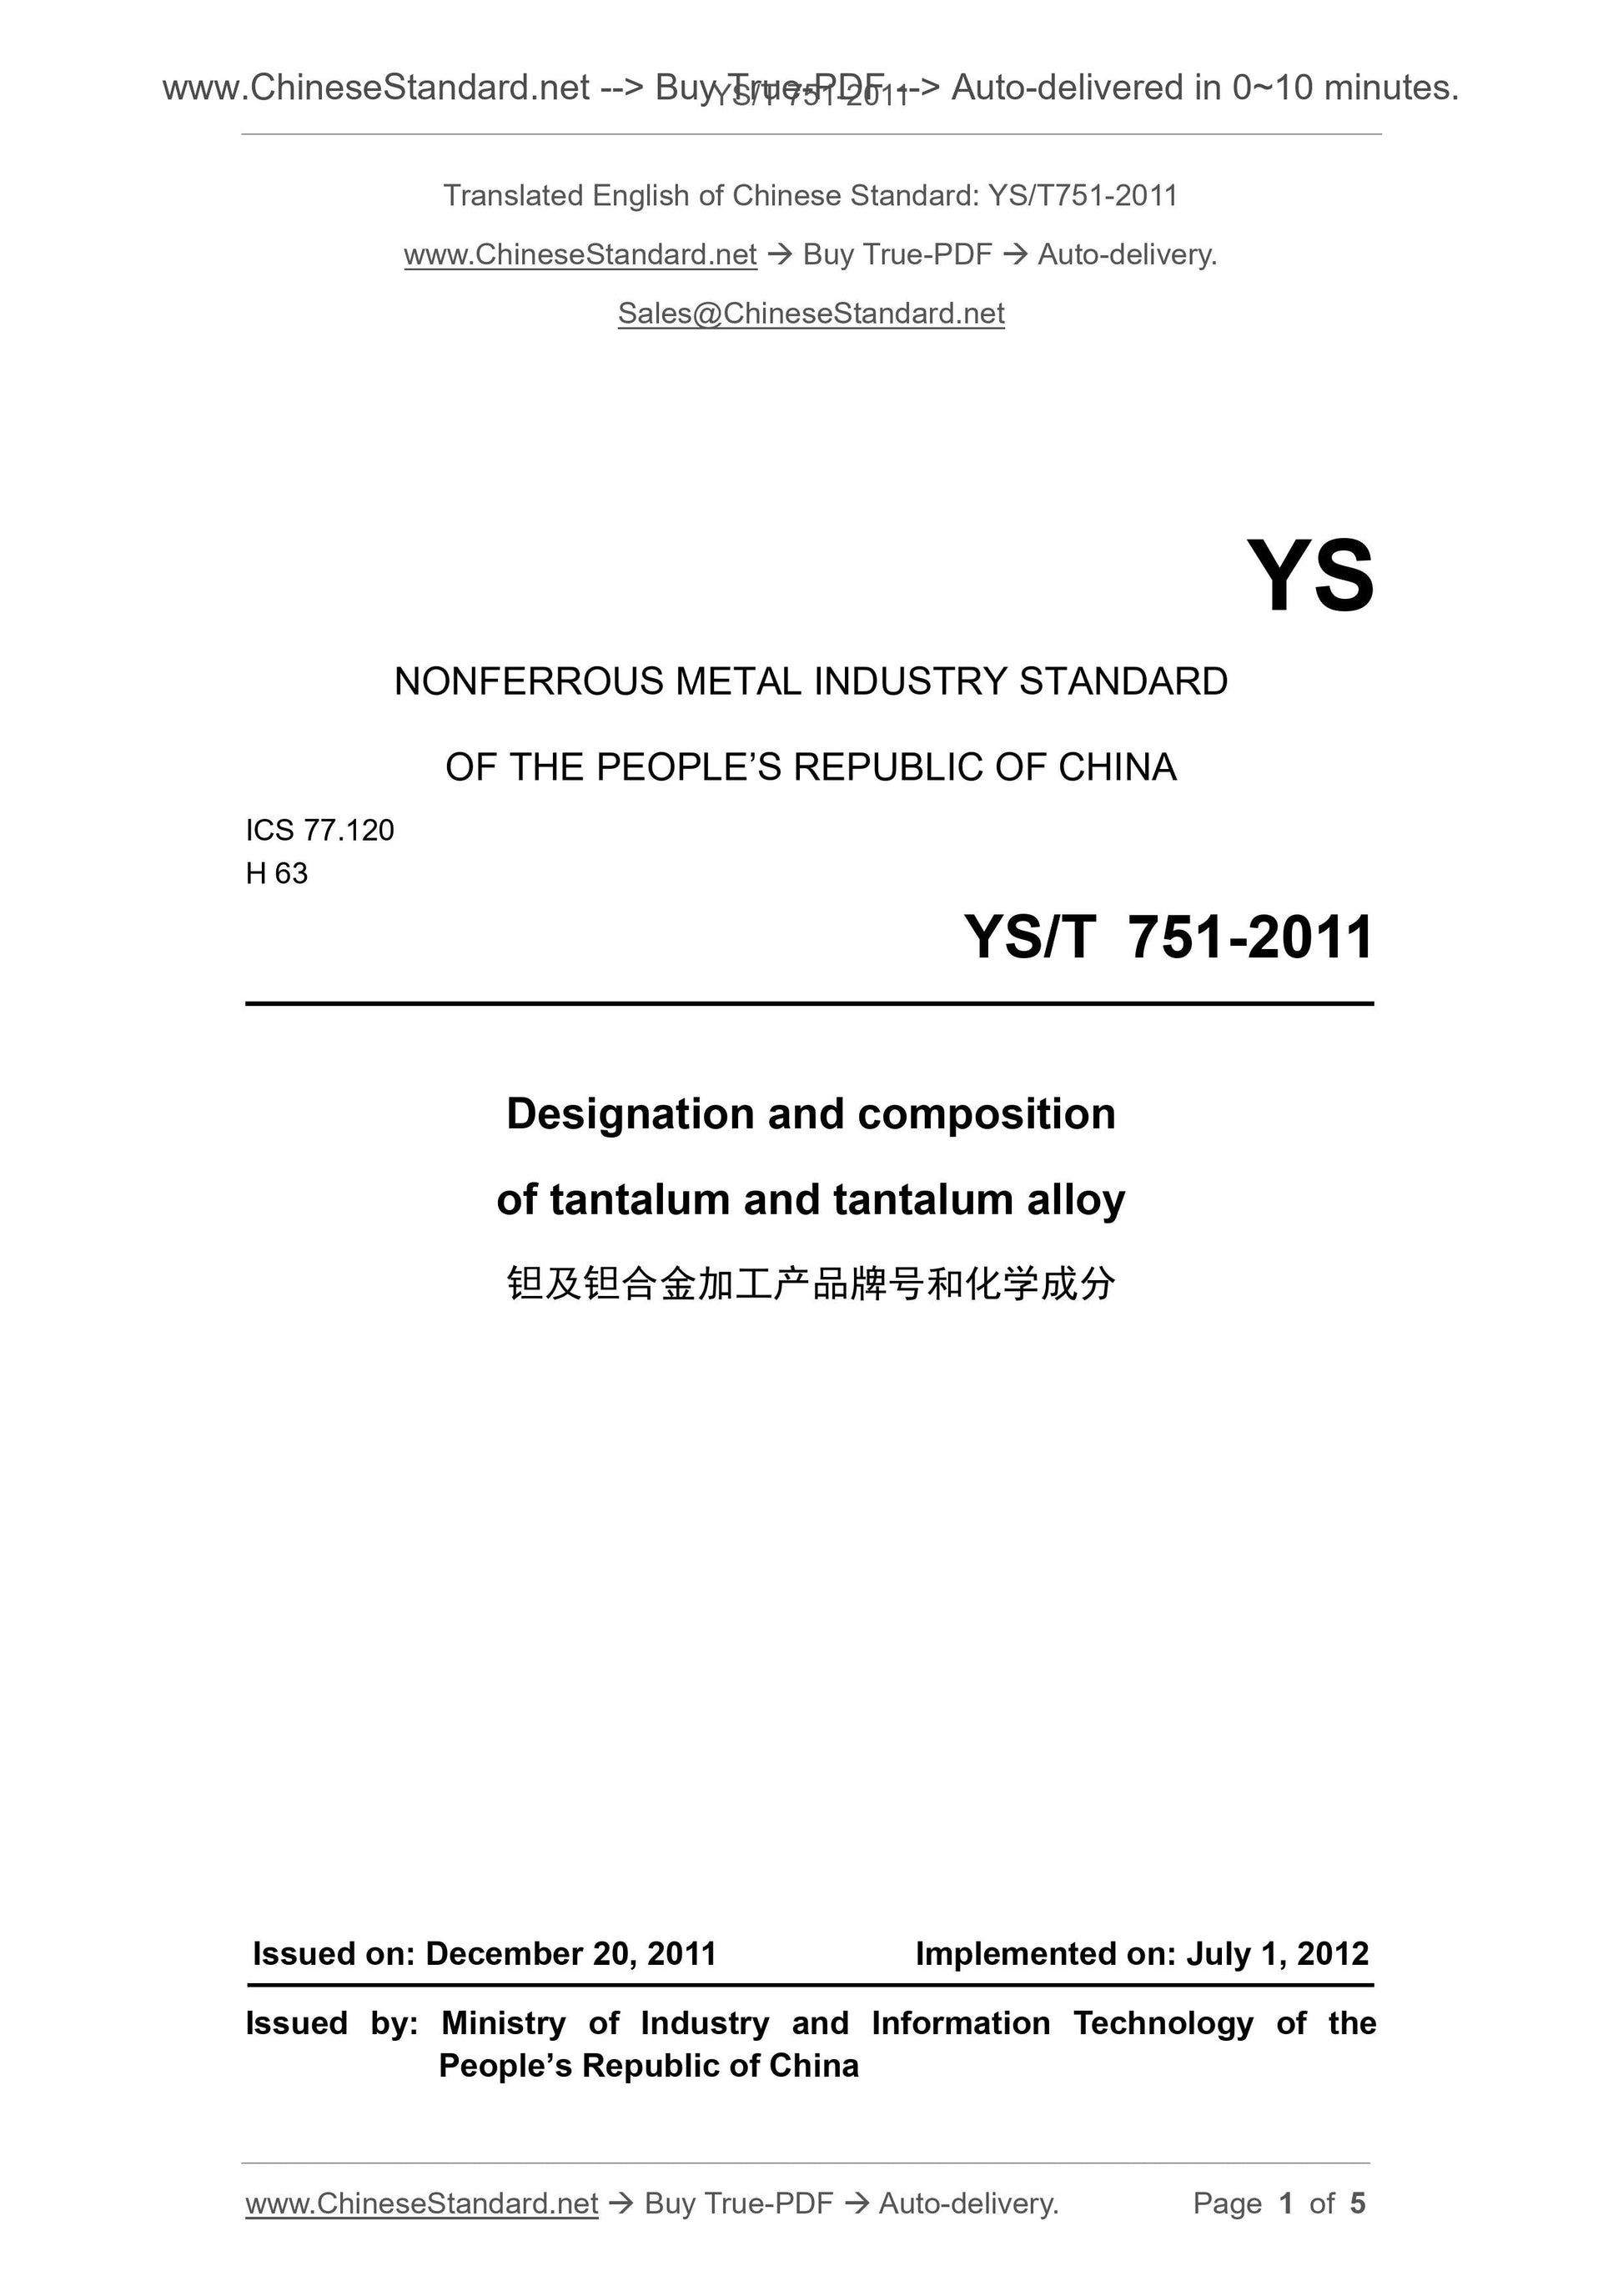 YS/T 751-2011 Page 1